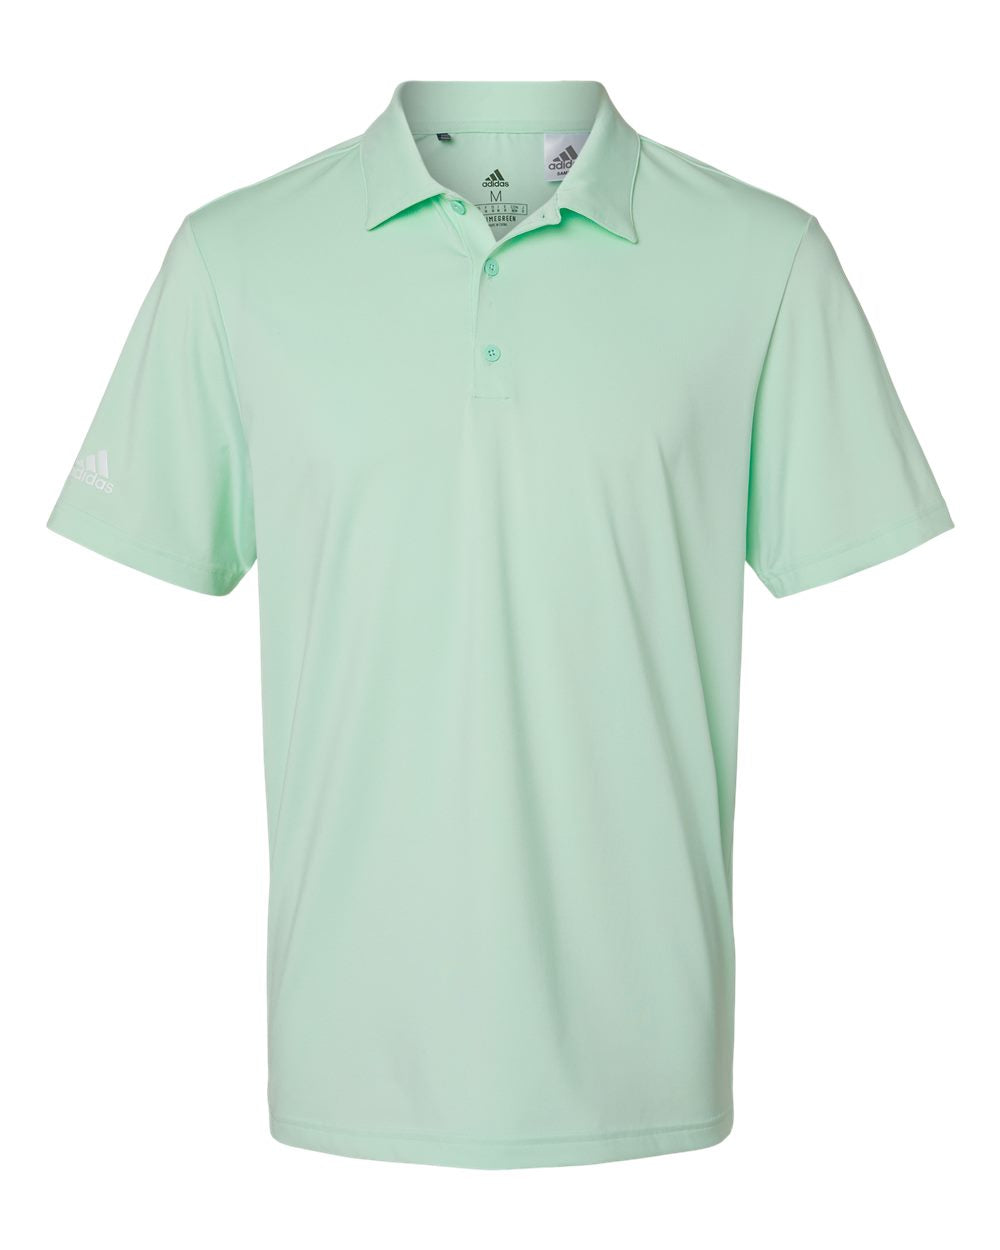 adidas ultimate polo clear mint